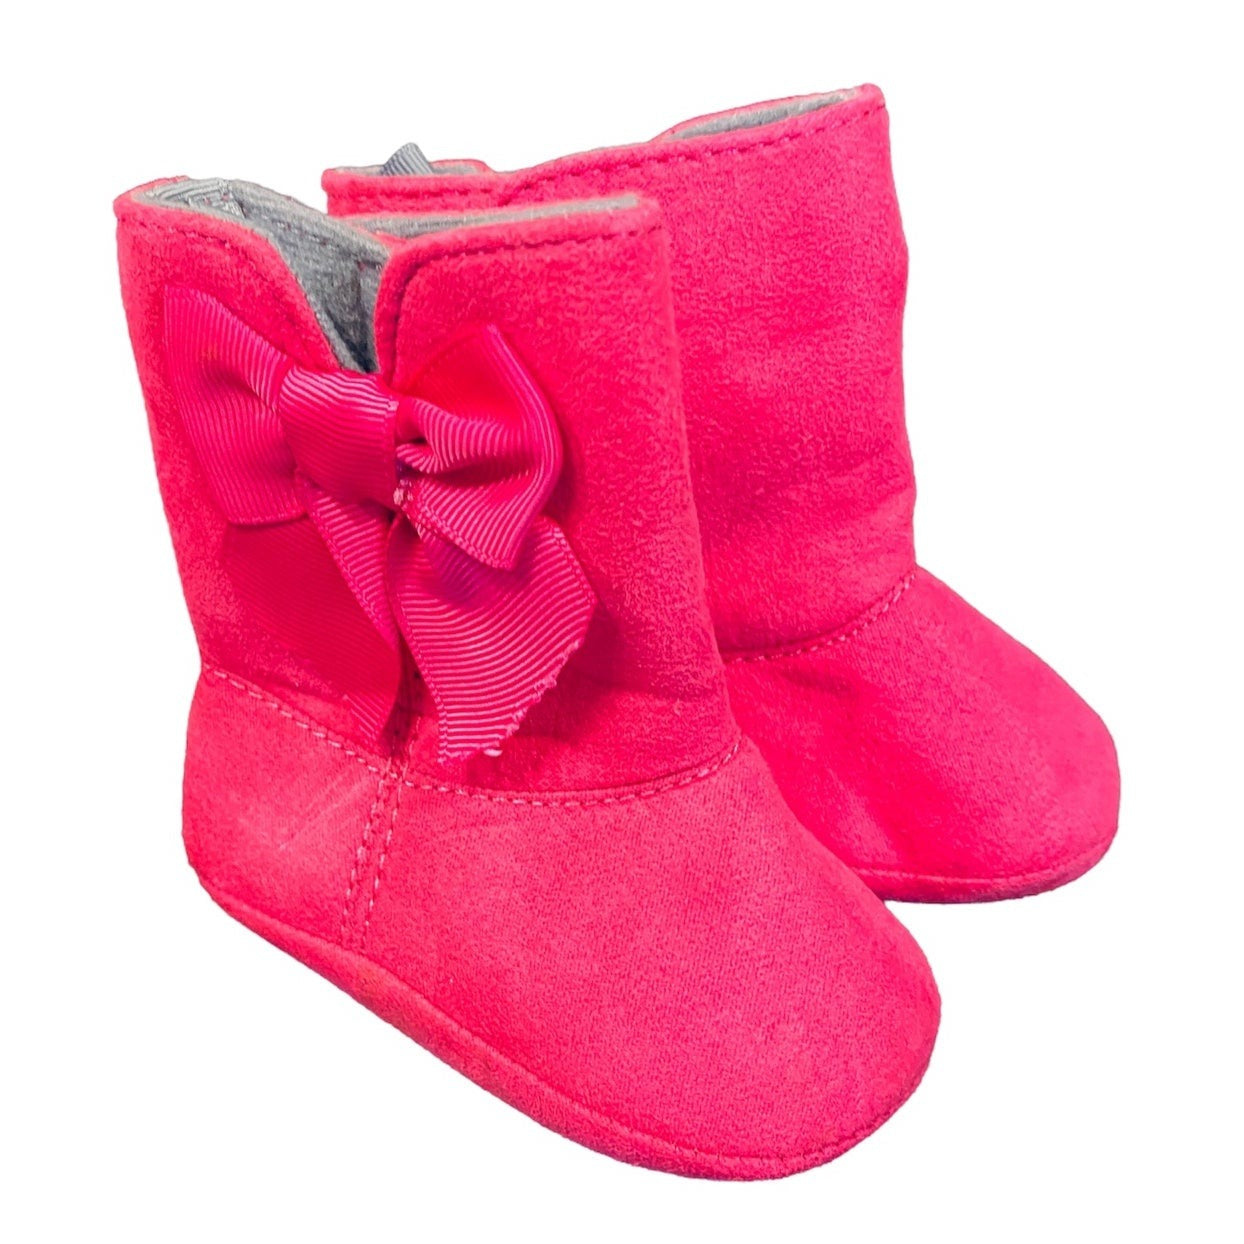 Baby girls size 2 hot pink boots